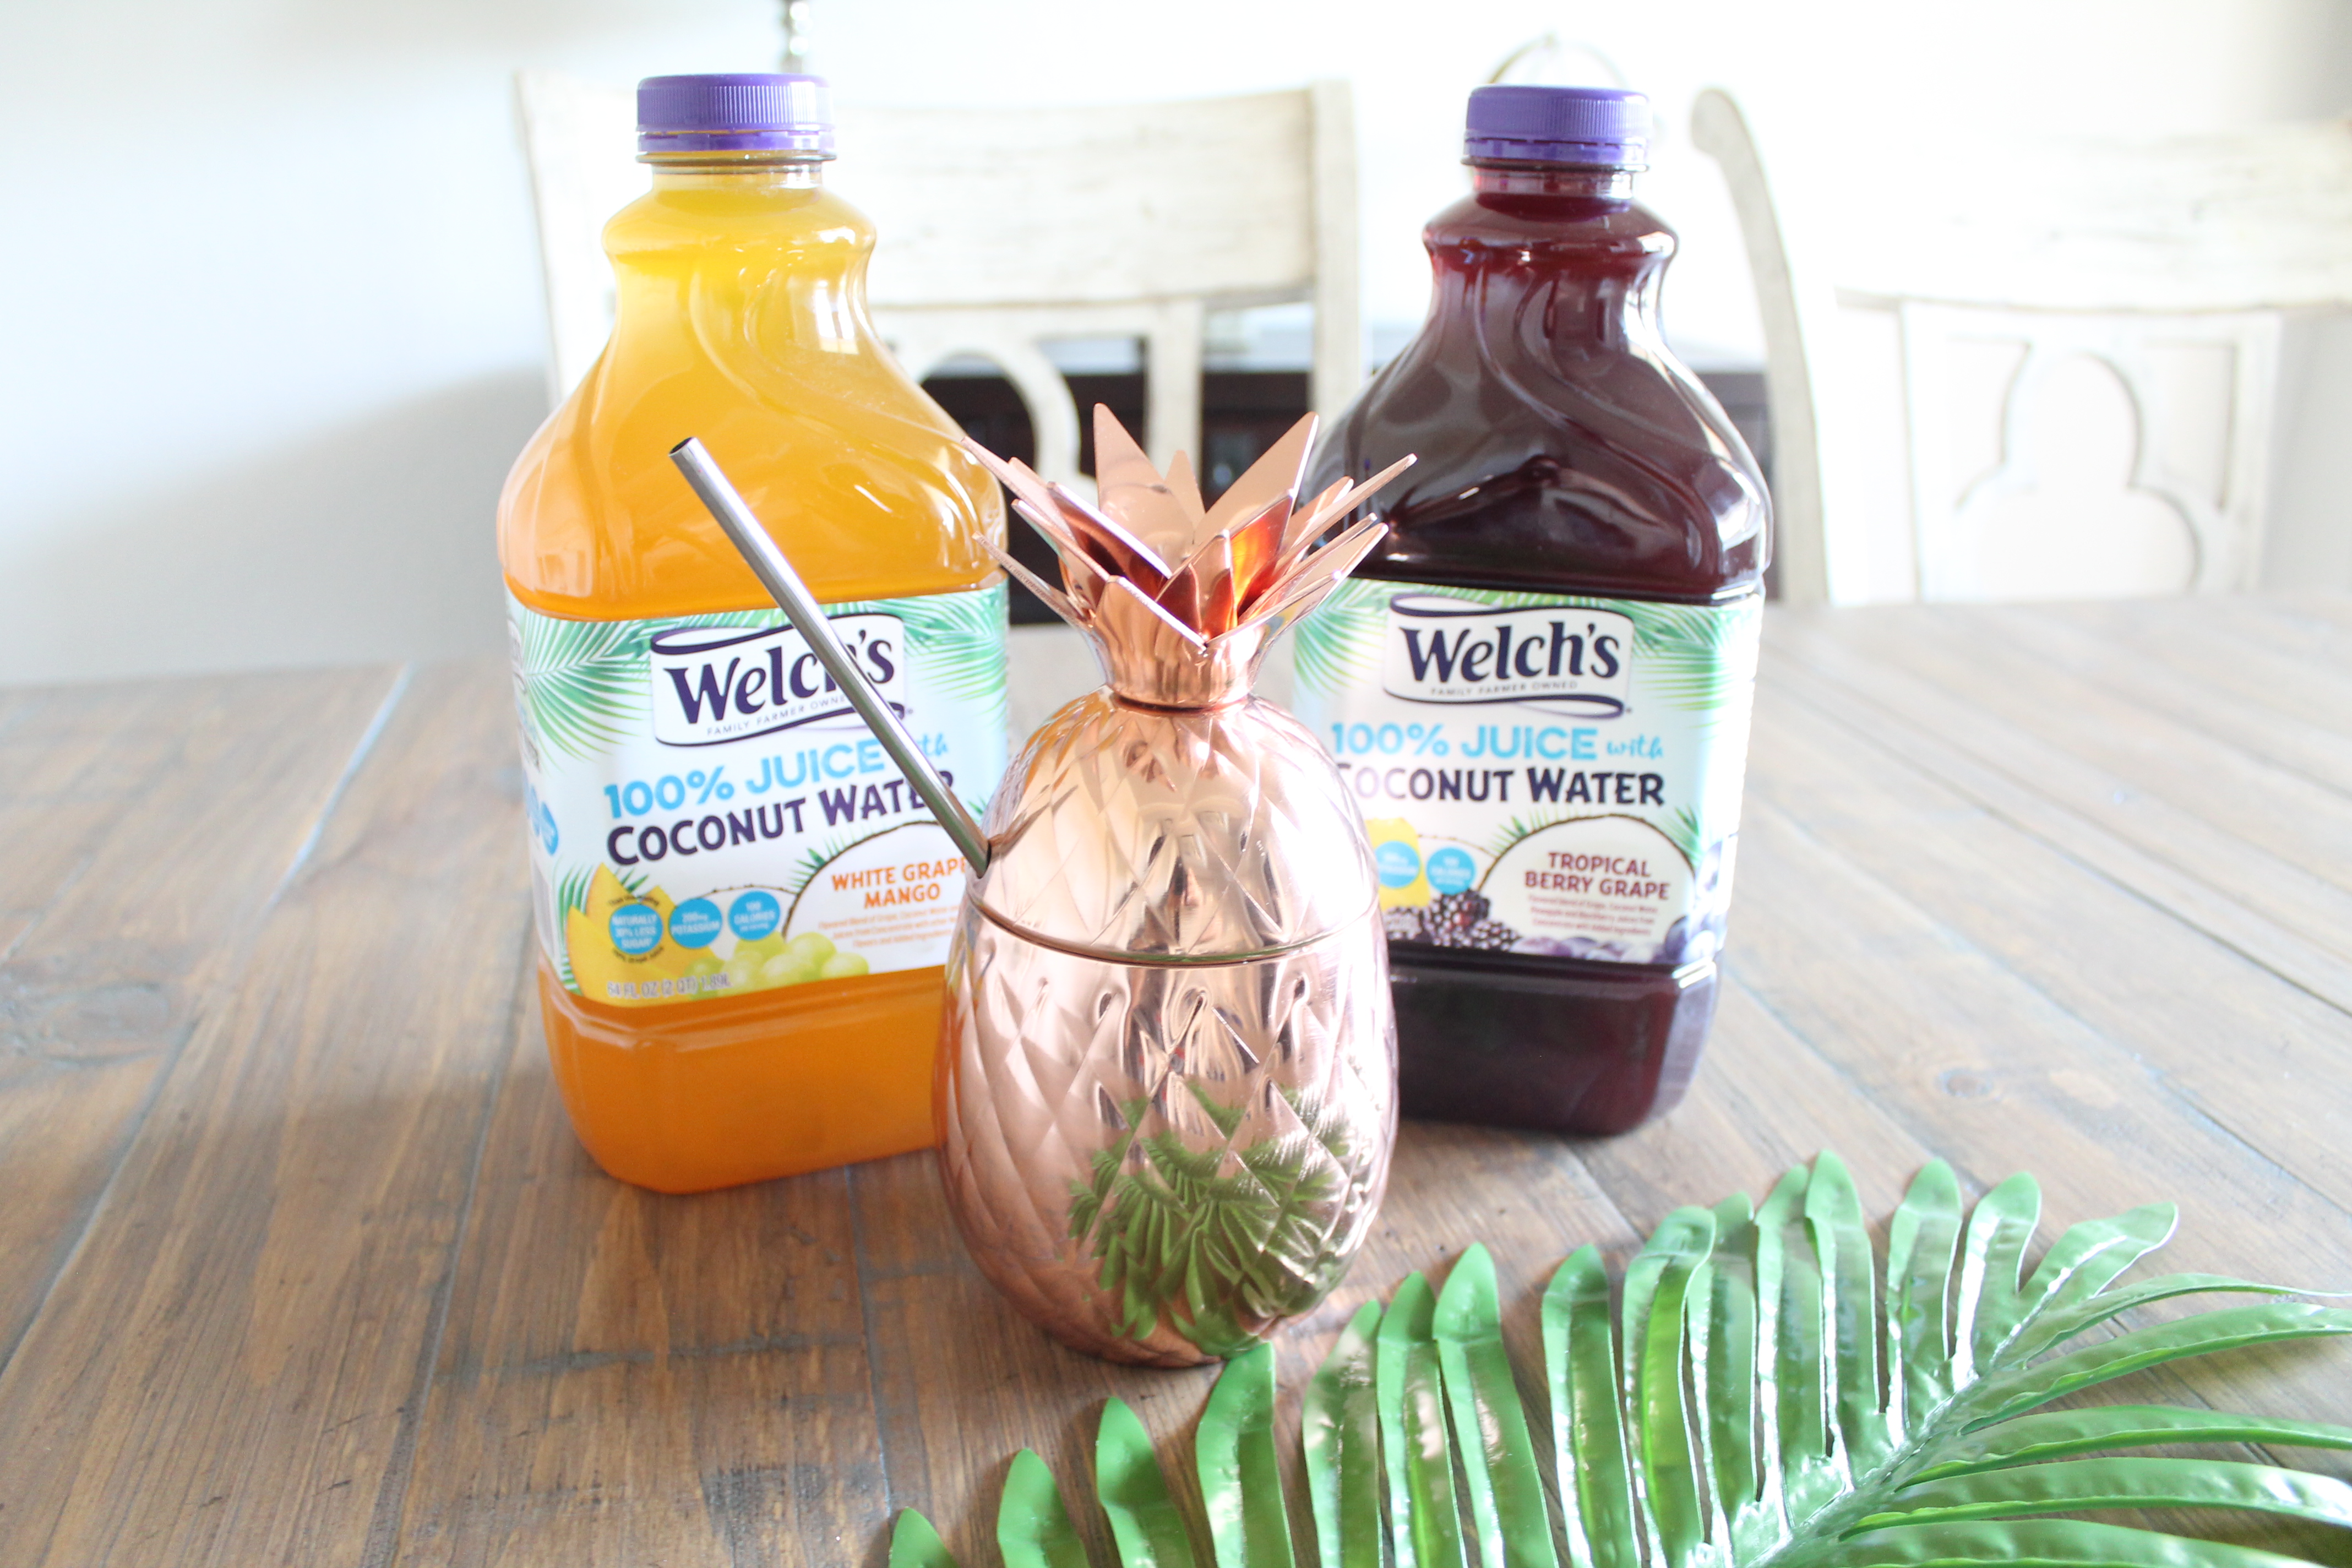 If you need some help in the chill department, here are 5 ways to not take motherhood so seriously. Sponsored by Welch's new 100% juice with Coconut Water. #welchs #motherhood #coconut water